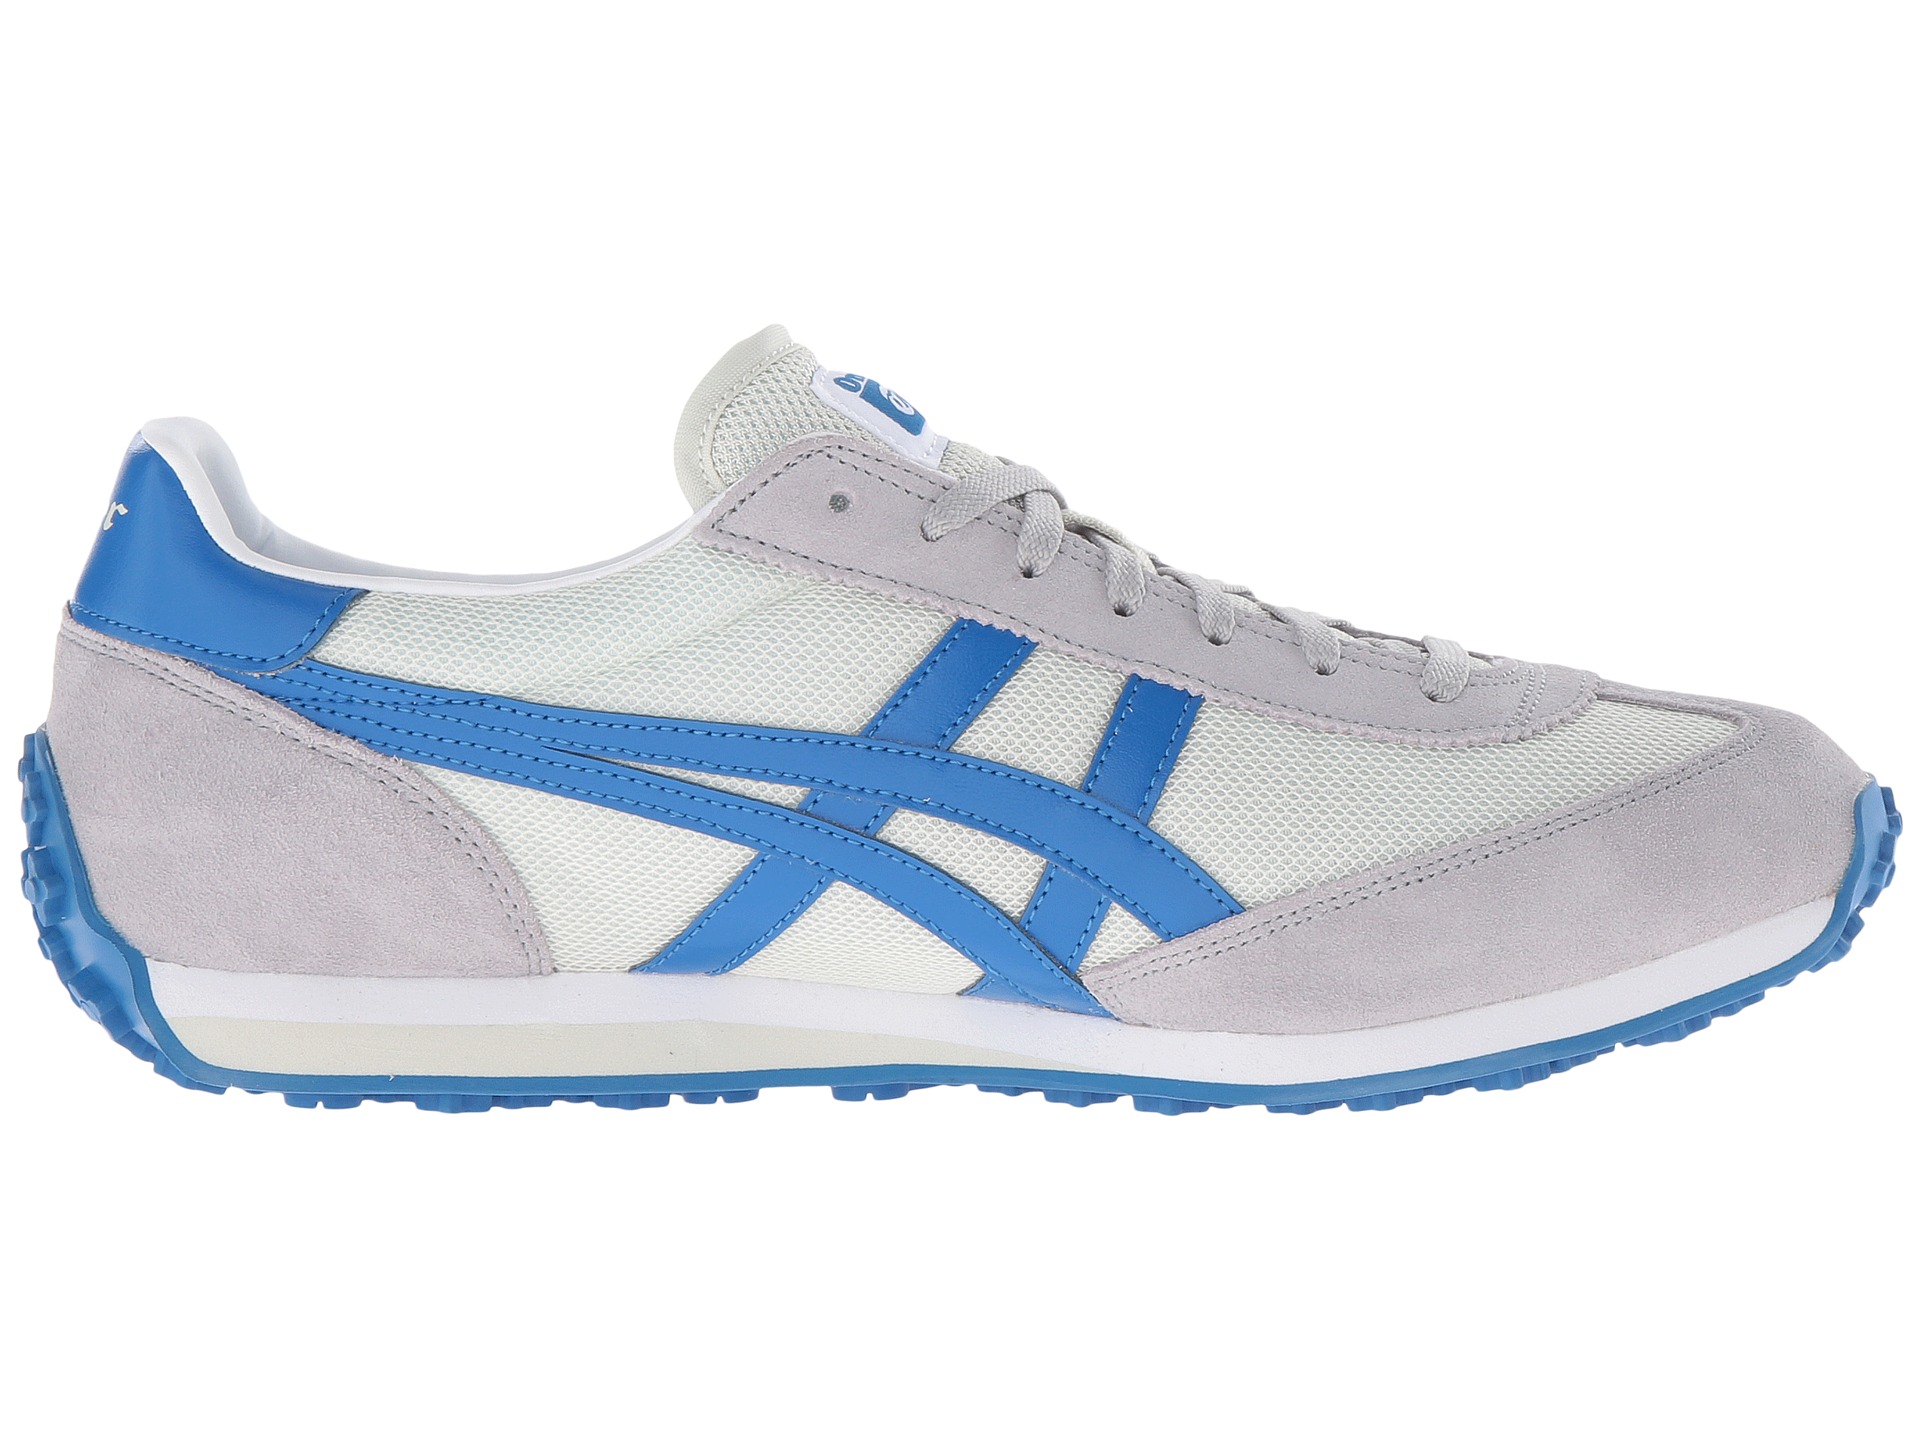 Onitsuka Tiger by Asics EDR 78™ Light Grey/Red - Zappos.com Free ...